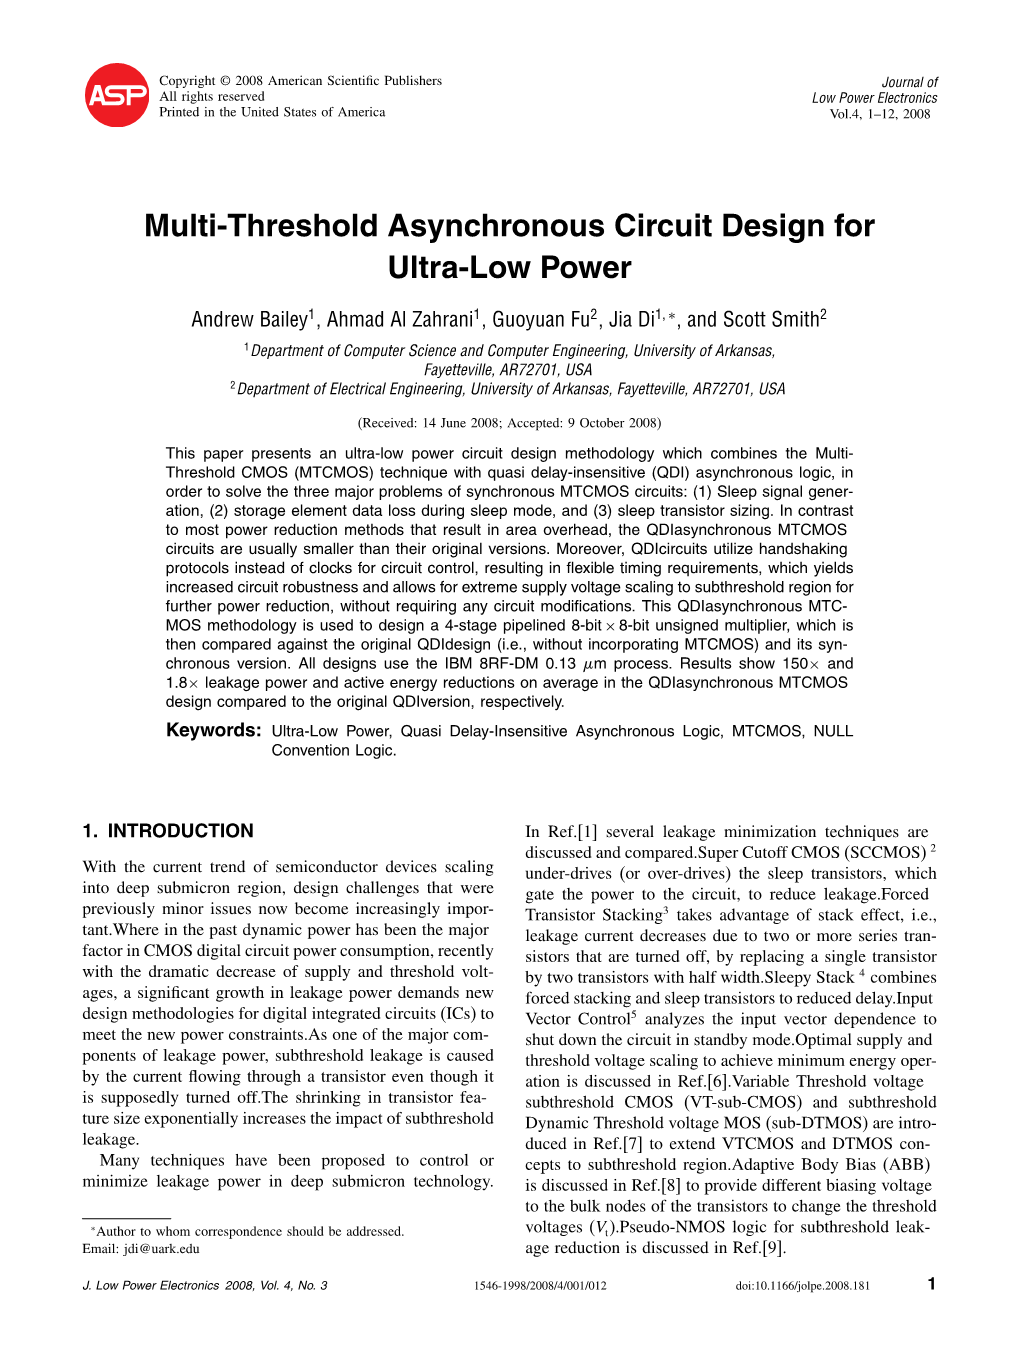 Multi-Threshold Asynchronous Circuit Design for Ultra-Low Power